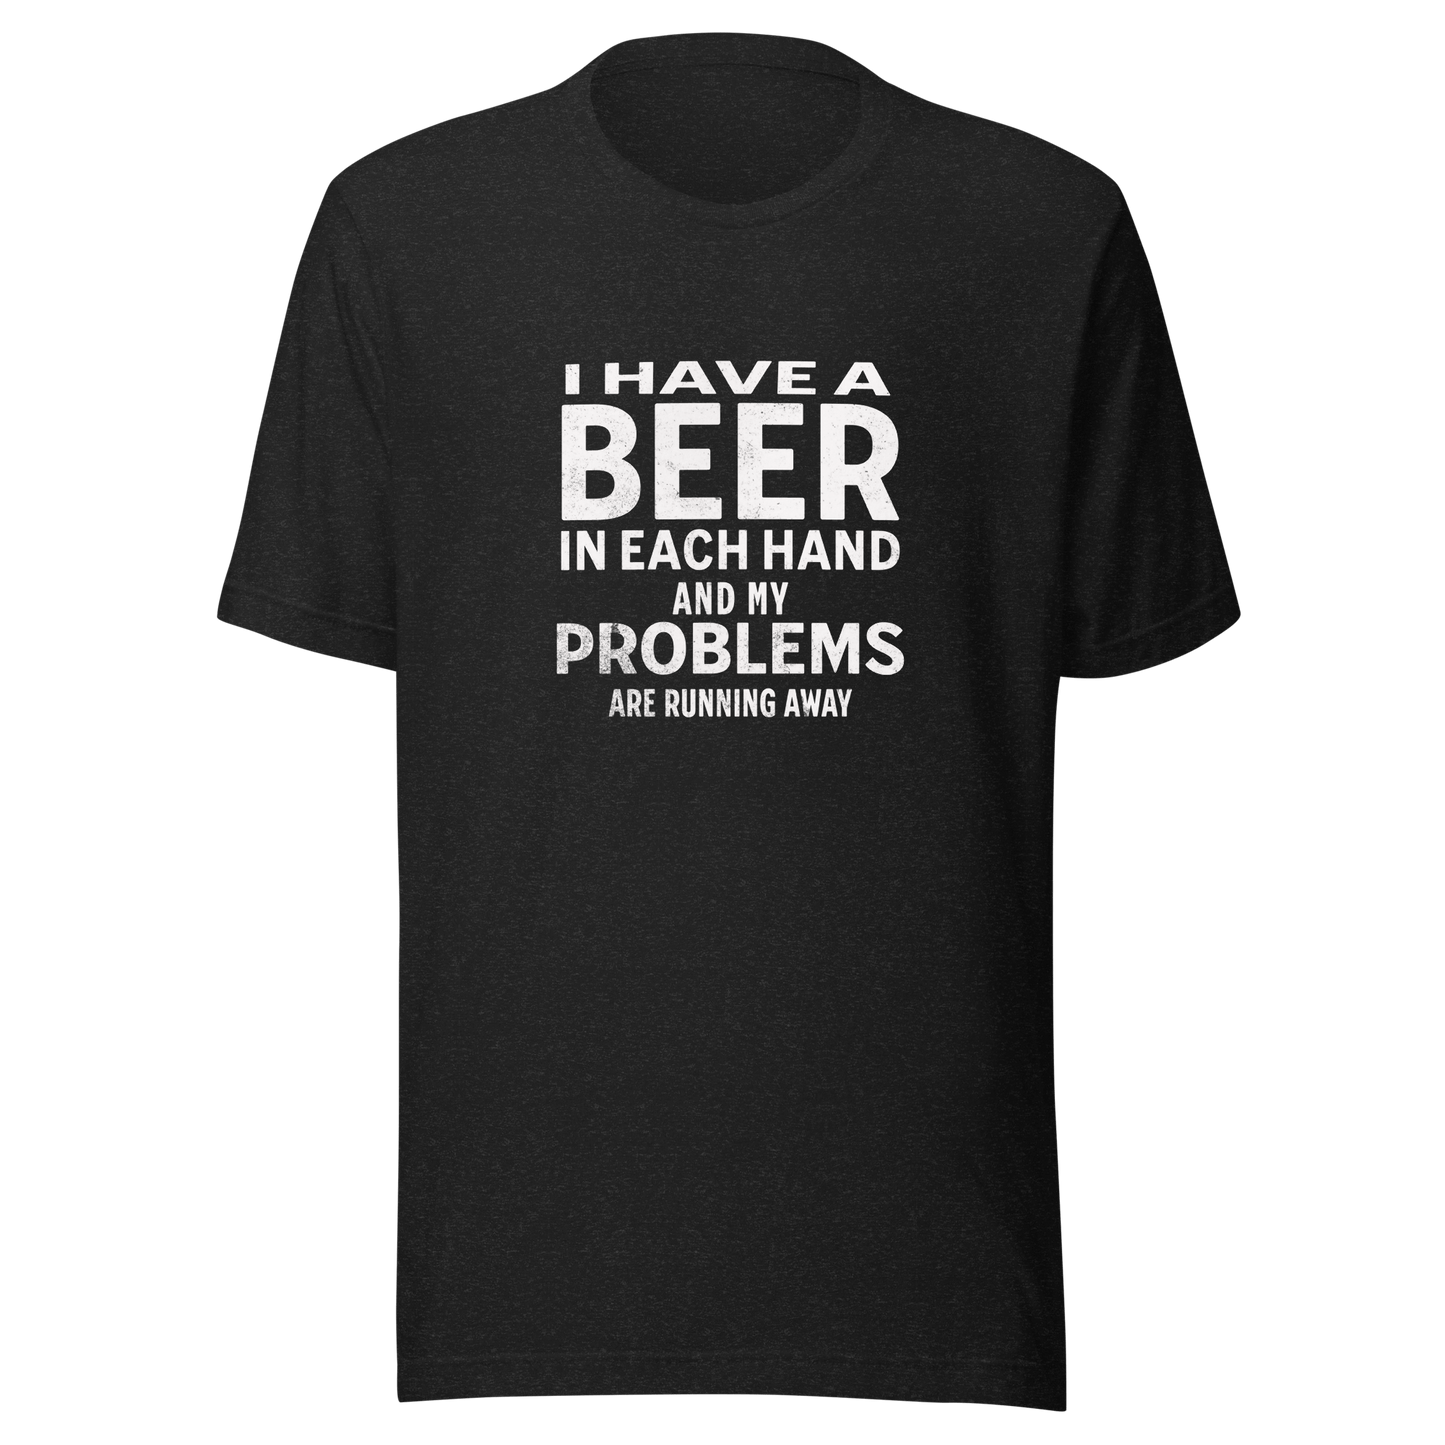 I Have a Beer in Each Hand Tee